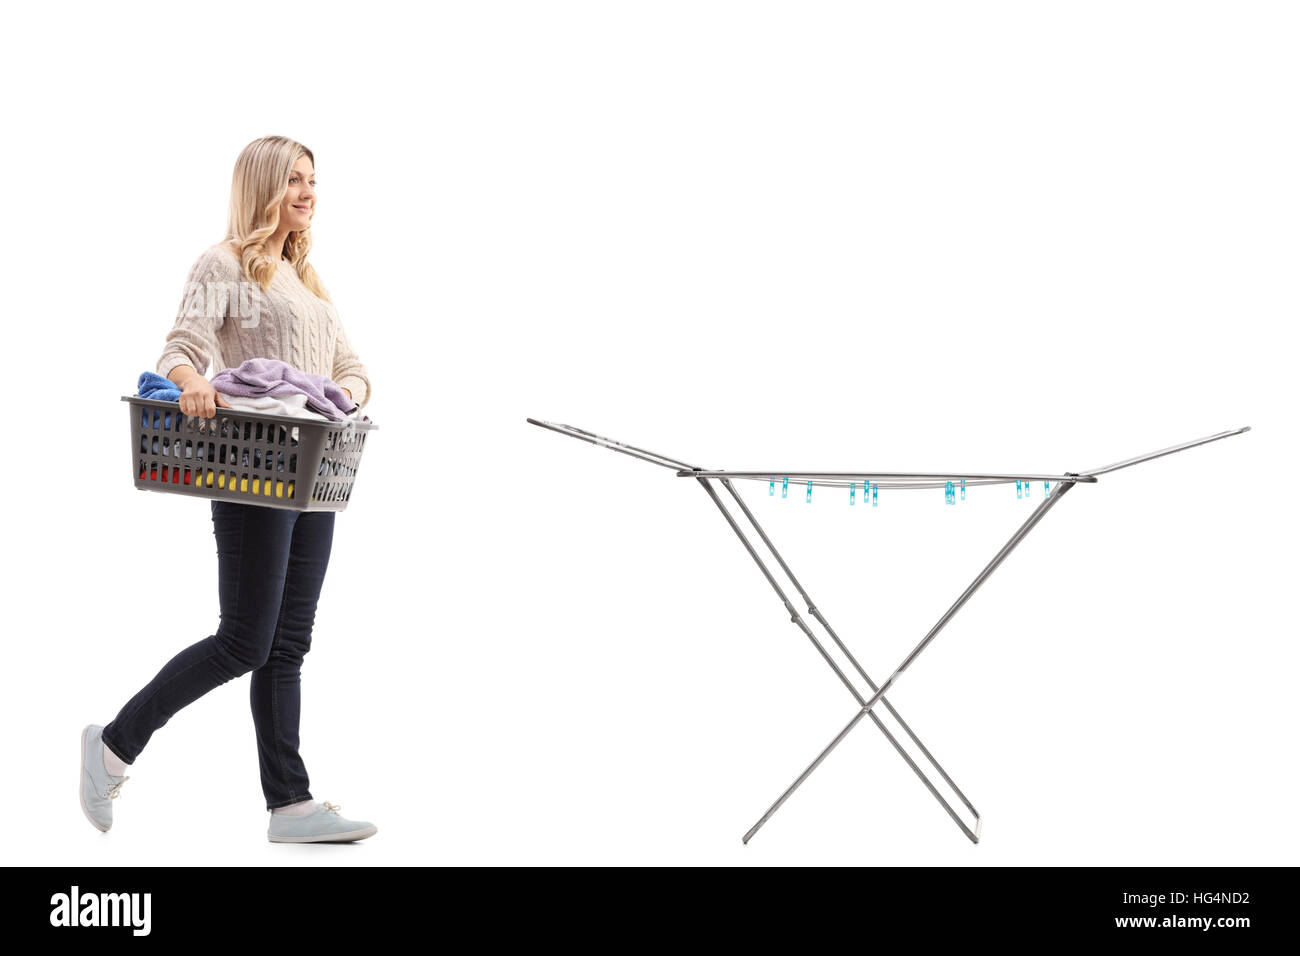 Full length portrait of a woman holding a laundry basket full of clothes and walking towards a clothing rack dryer isolated on white background Stock Photo